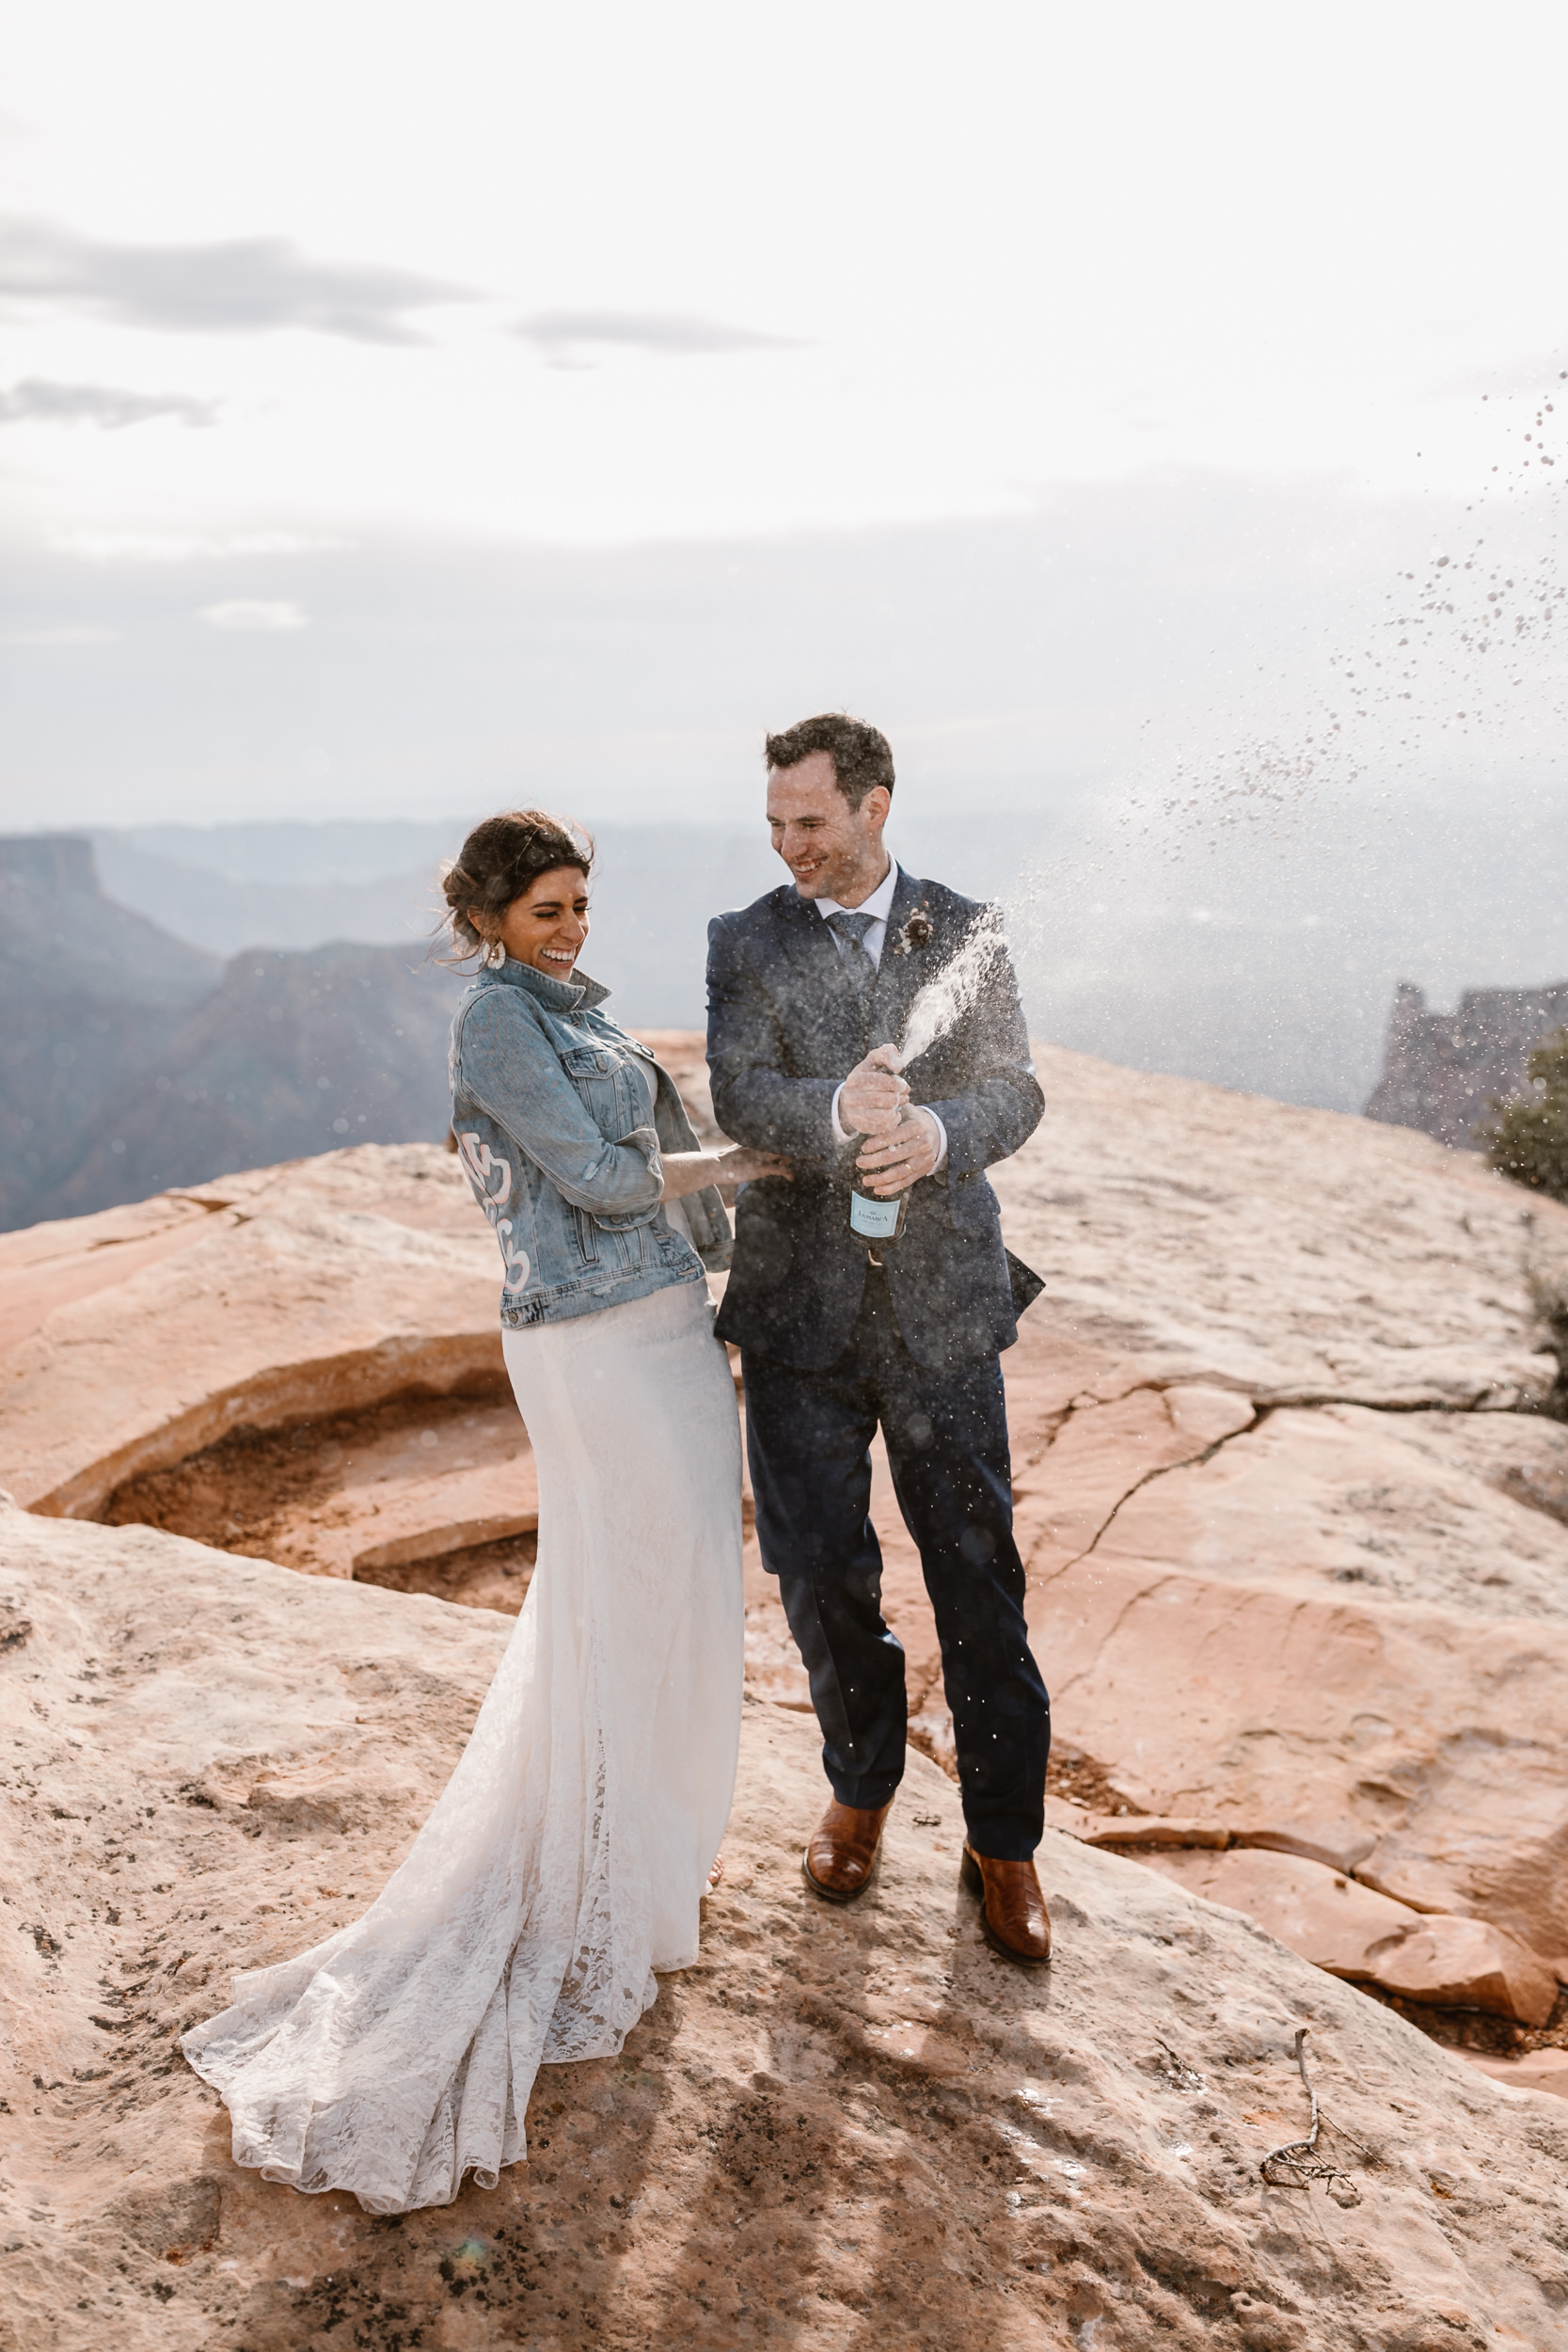 The Hearnes Adventure Wedding in Moab Utah Wedding picture champagne